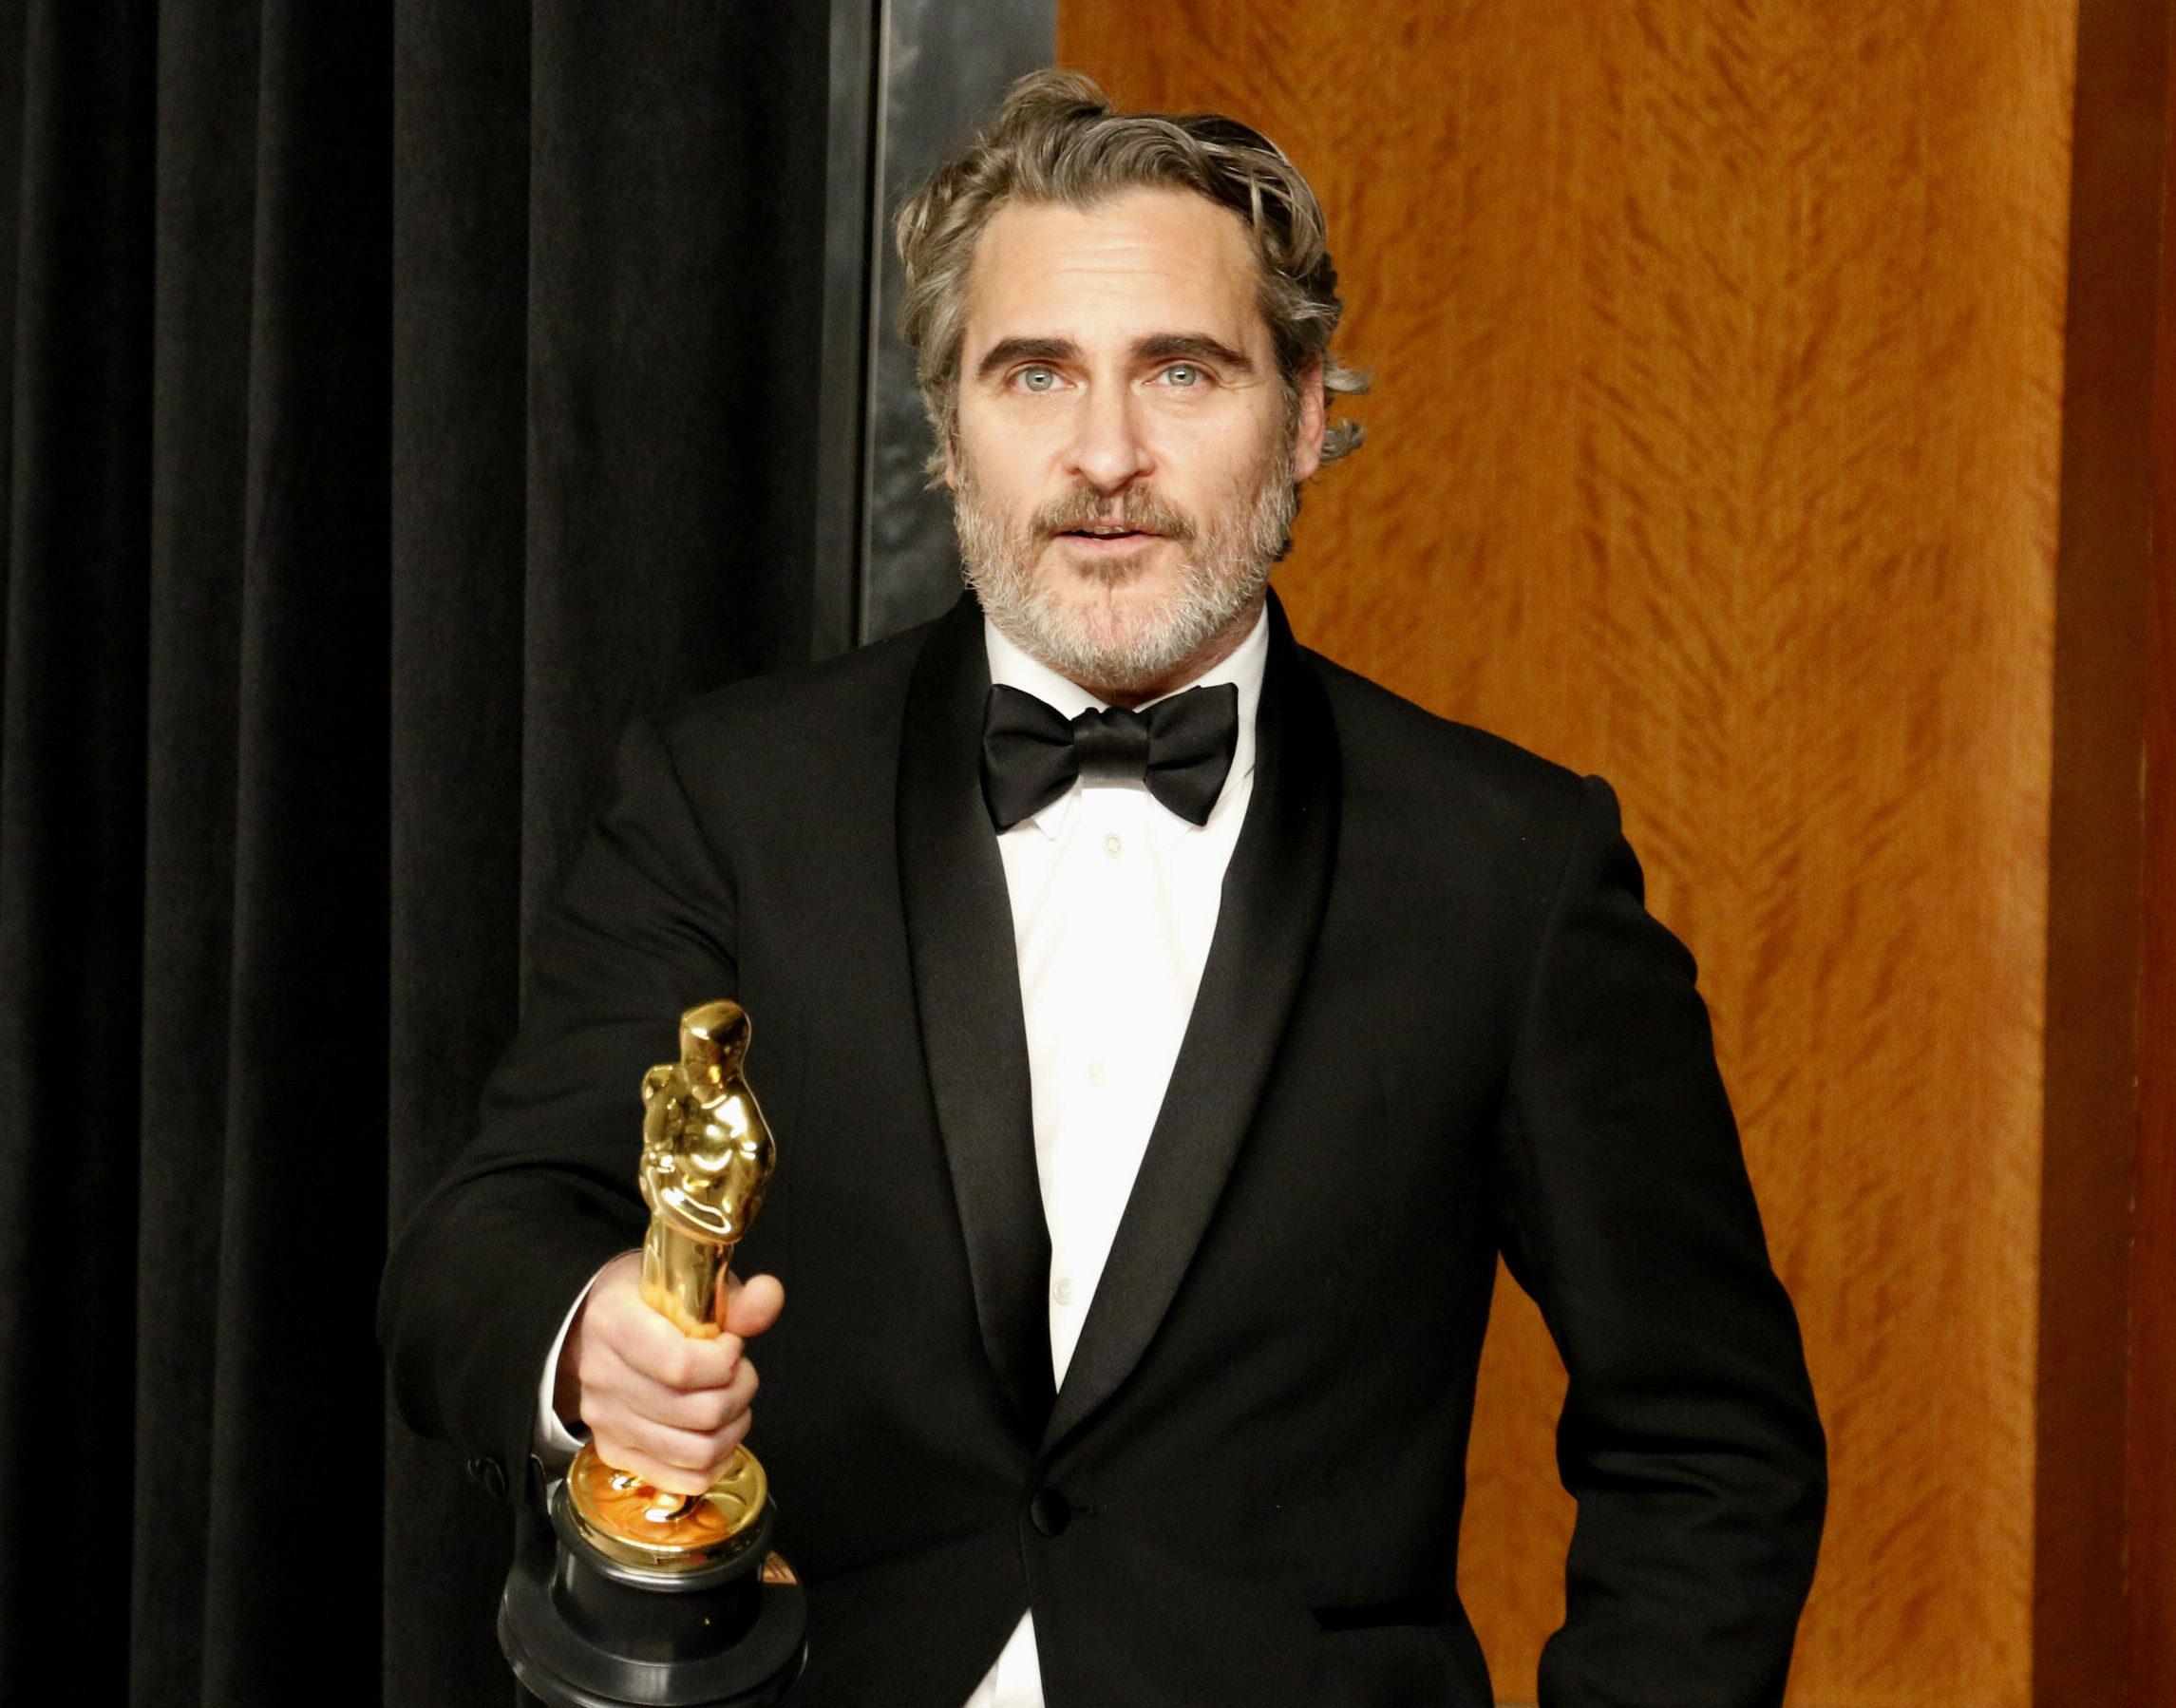 92nd Academy Awards - Press Room held at the Dolby Theatre in Hollywood. 09 Feb 2020 Pictured: Joaquin Phoenix.